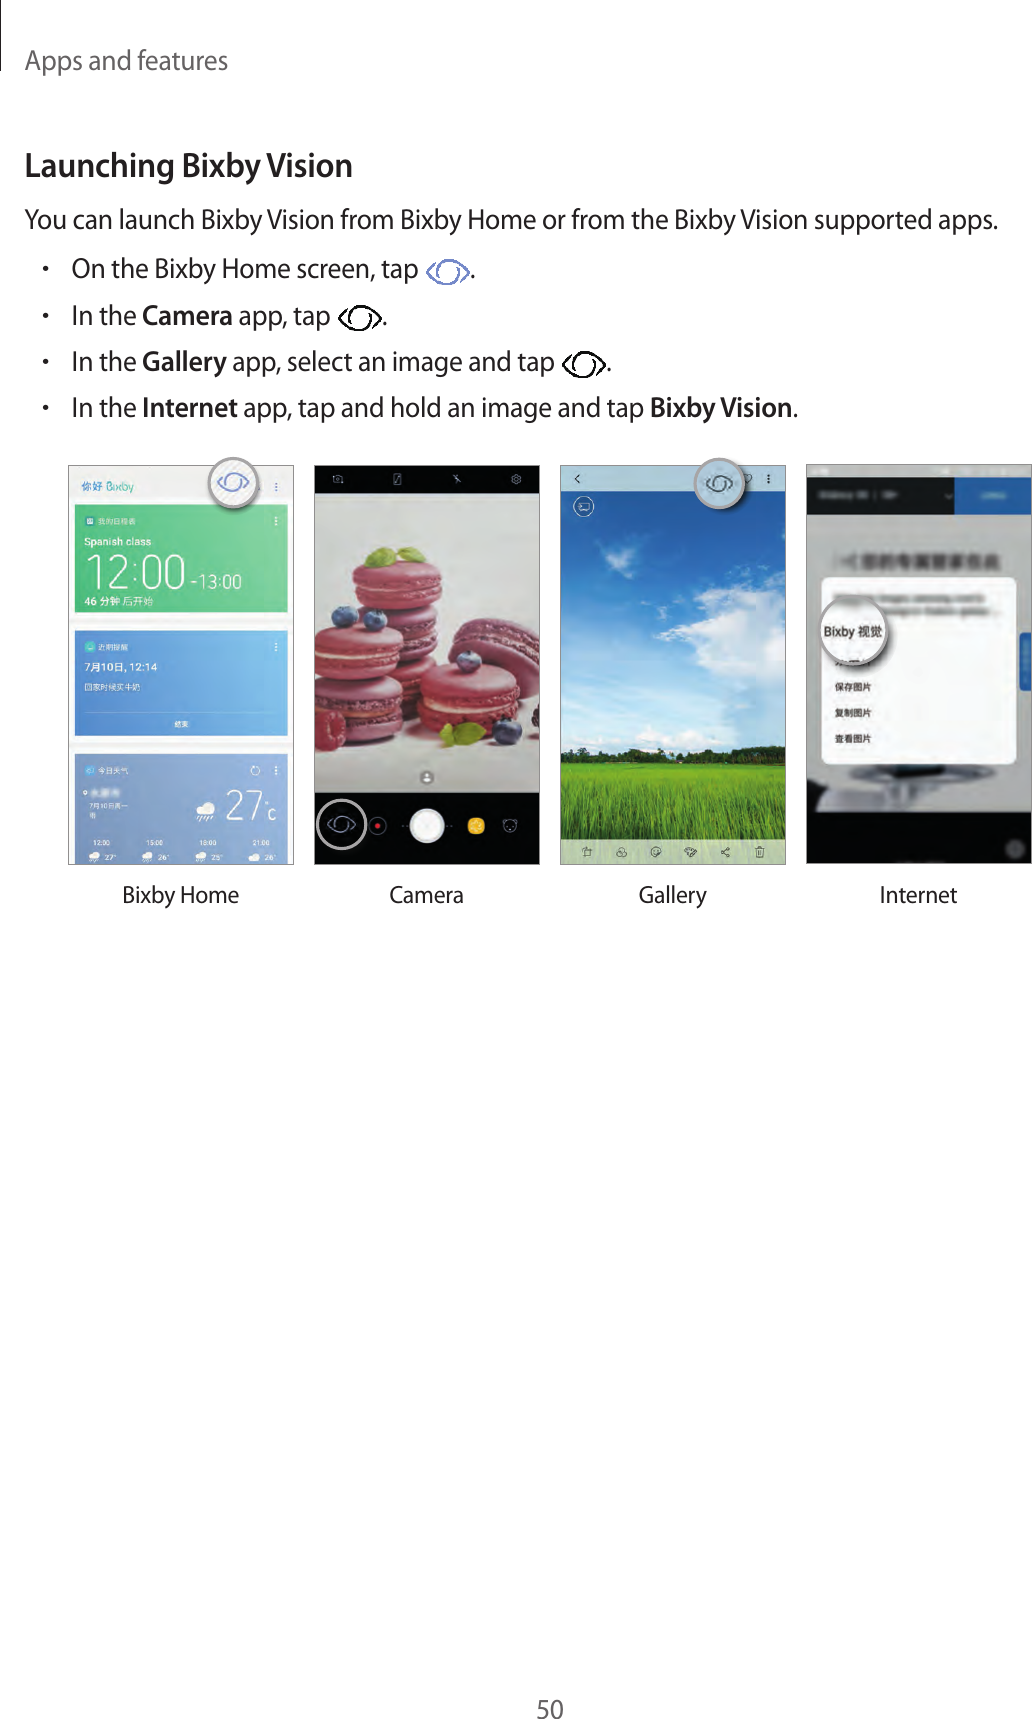 Apps and features50Launching Bixby VisionYou can launch Bixby Vision from Bixby Home or from the Bixby Vision supported apps.•On the Bixby Home screen, tap  .•In the Camera app, tap  .•In the Gallery app, select an image and tap  .•In the Internet app, tap and hold an image and tap Bixby Vision.Bixby Home Camera Gallery Internet